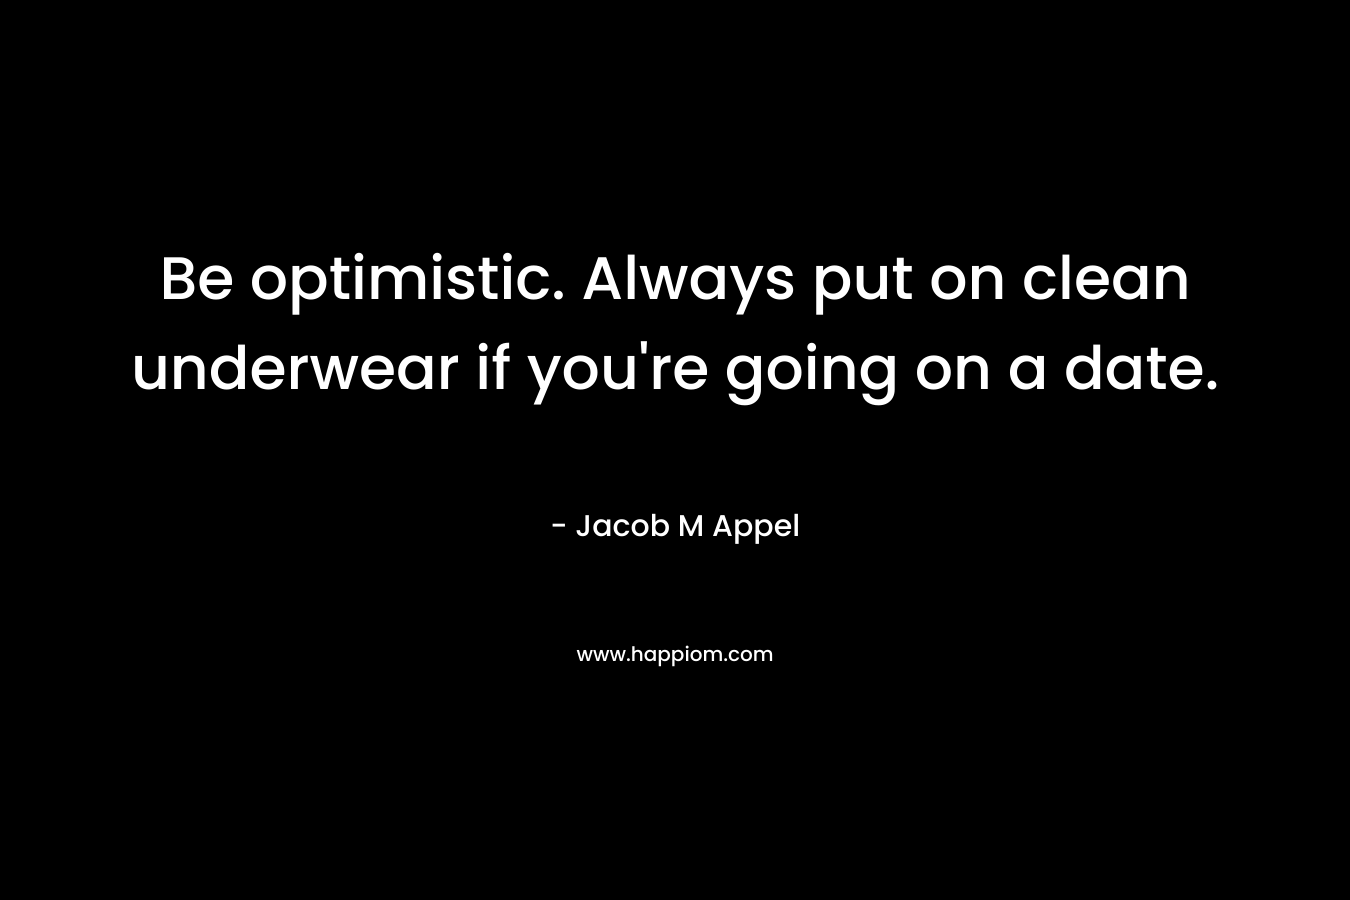 Be optimistic. Always put on clean underwear if you’re going on a date. – Jacob M Appel